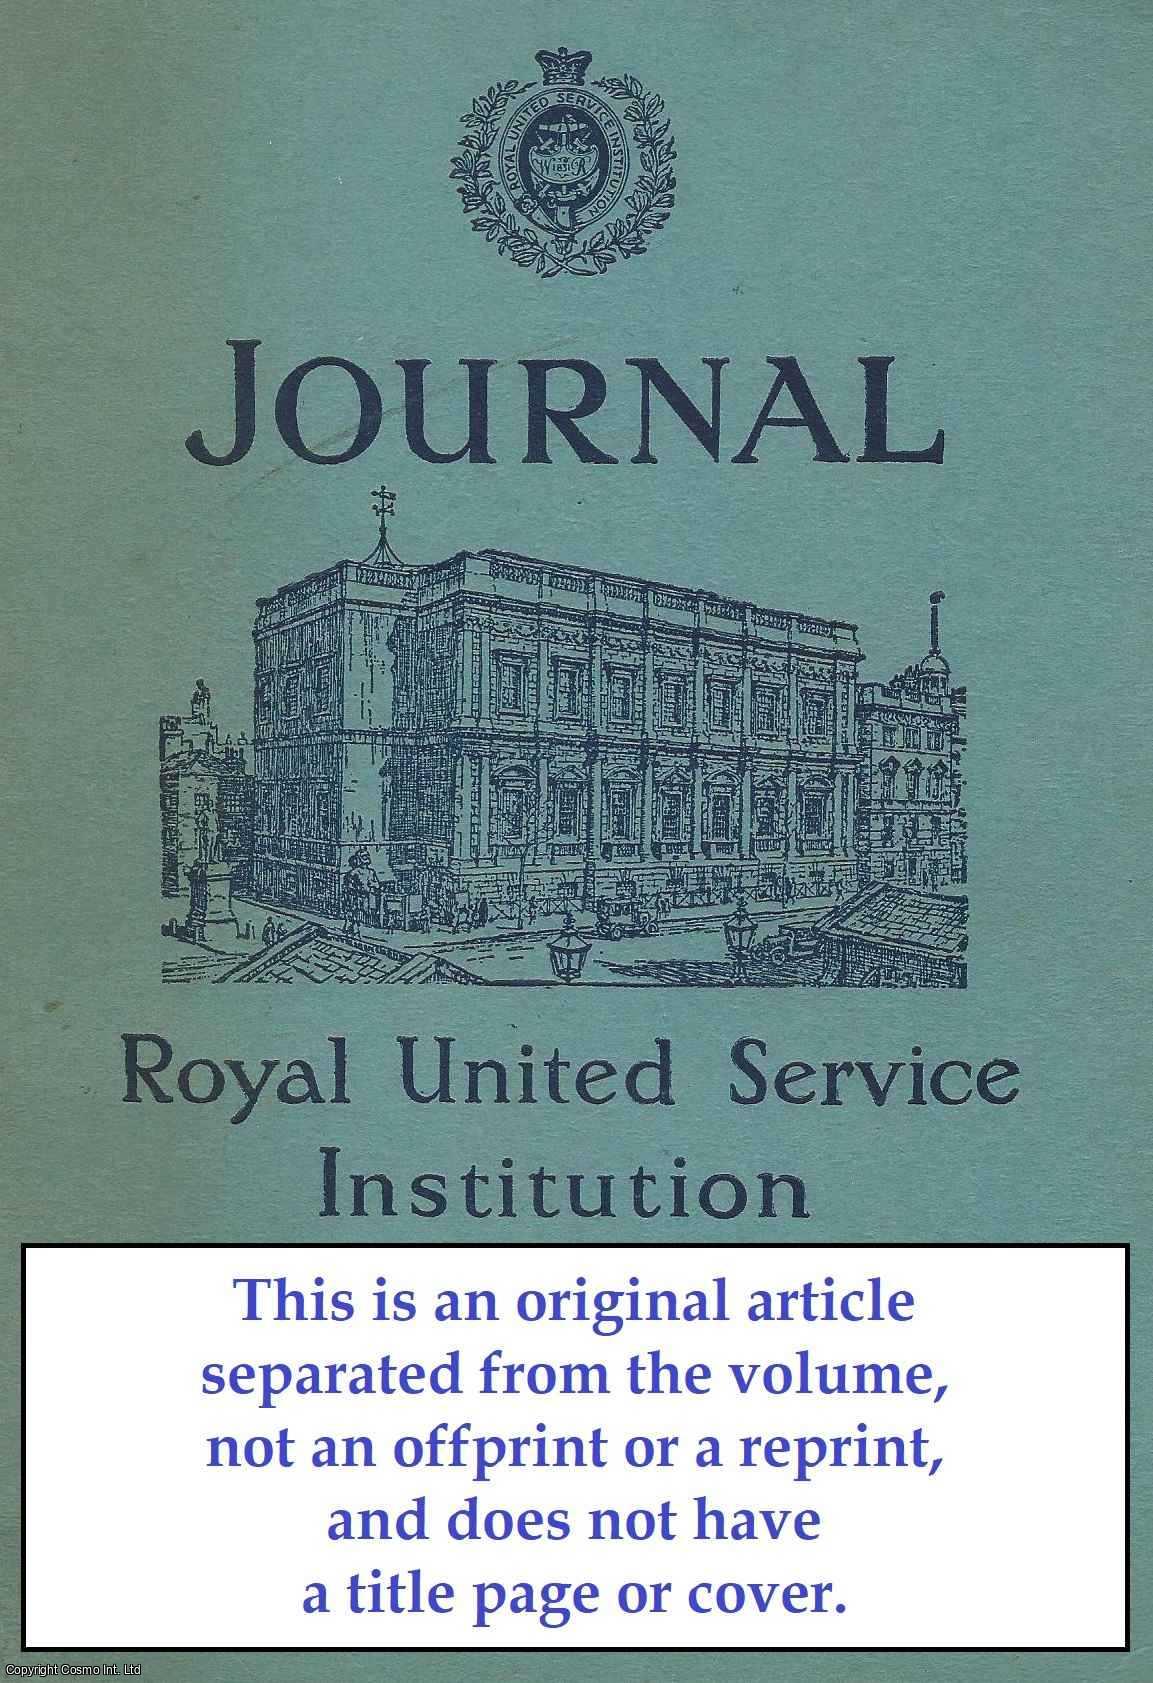 John Erickson - The Training of The Soviet Soldier. An original article from The Journal of The Royal United Services Institute for Defence Studies, 1971.